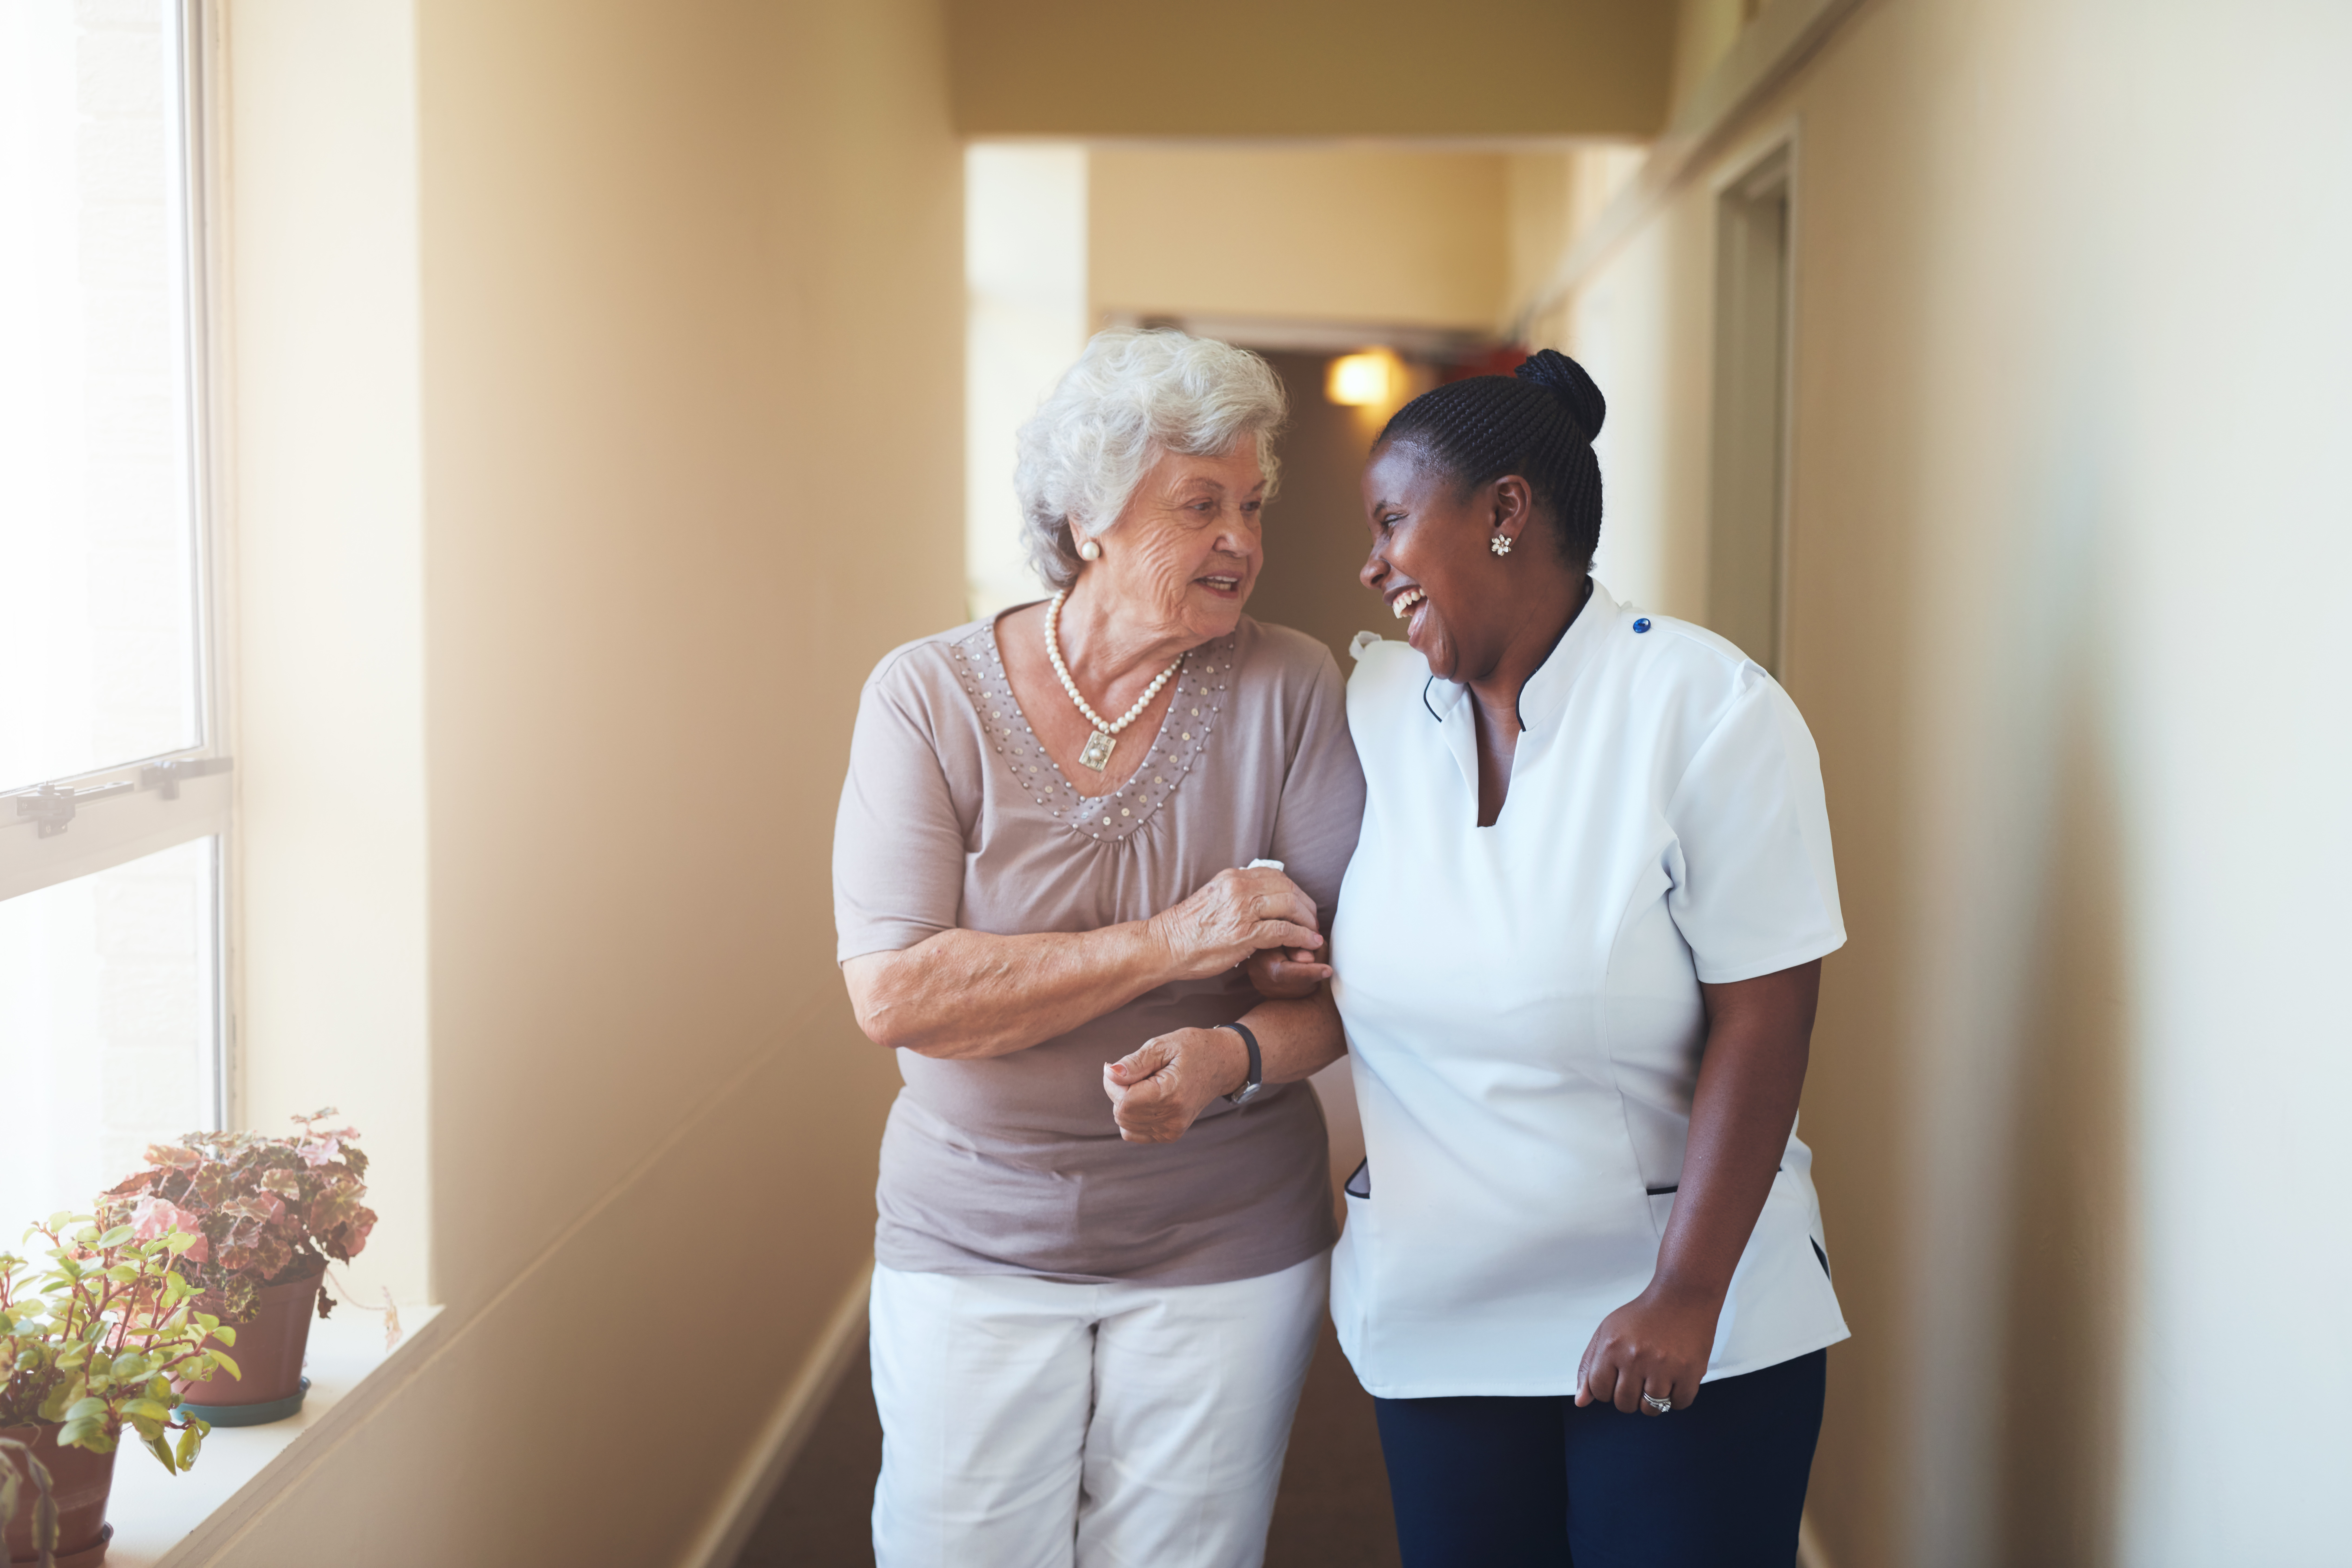 Recognising and Responding to deterioration in care homes